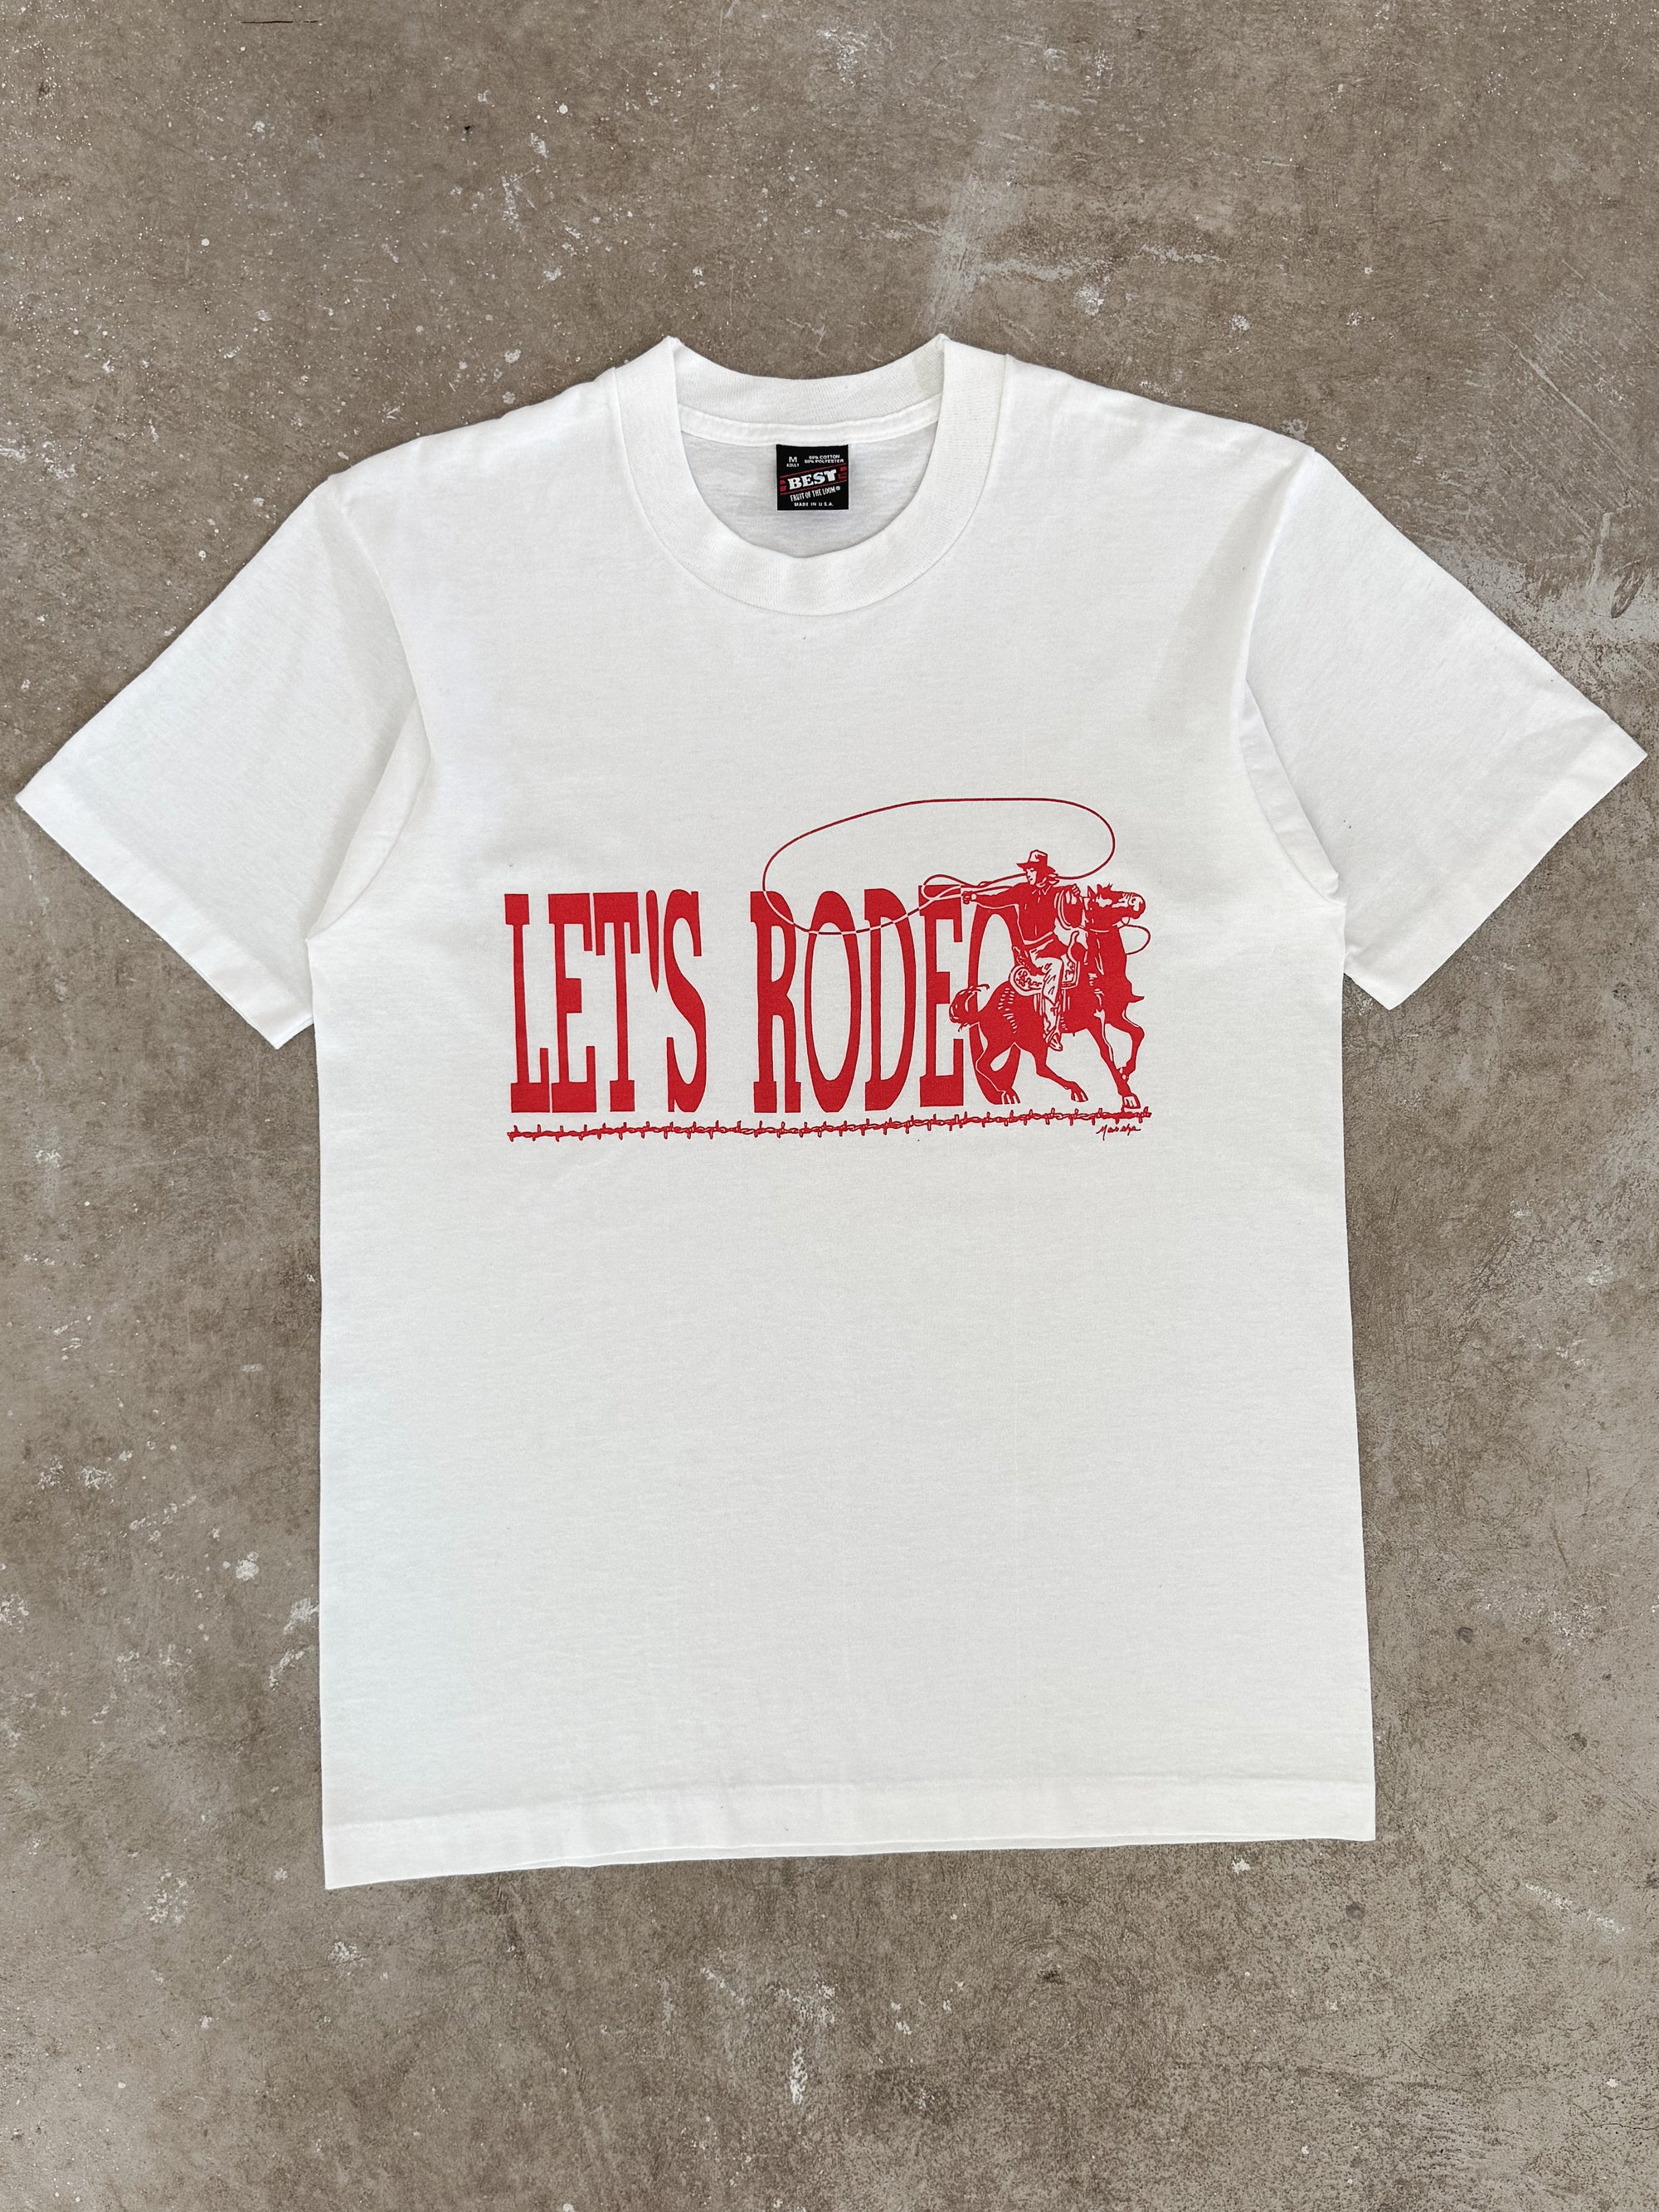 1990s "Let's Rodeo" Tee (M)